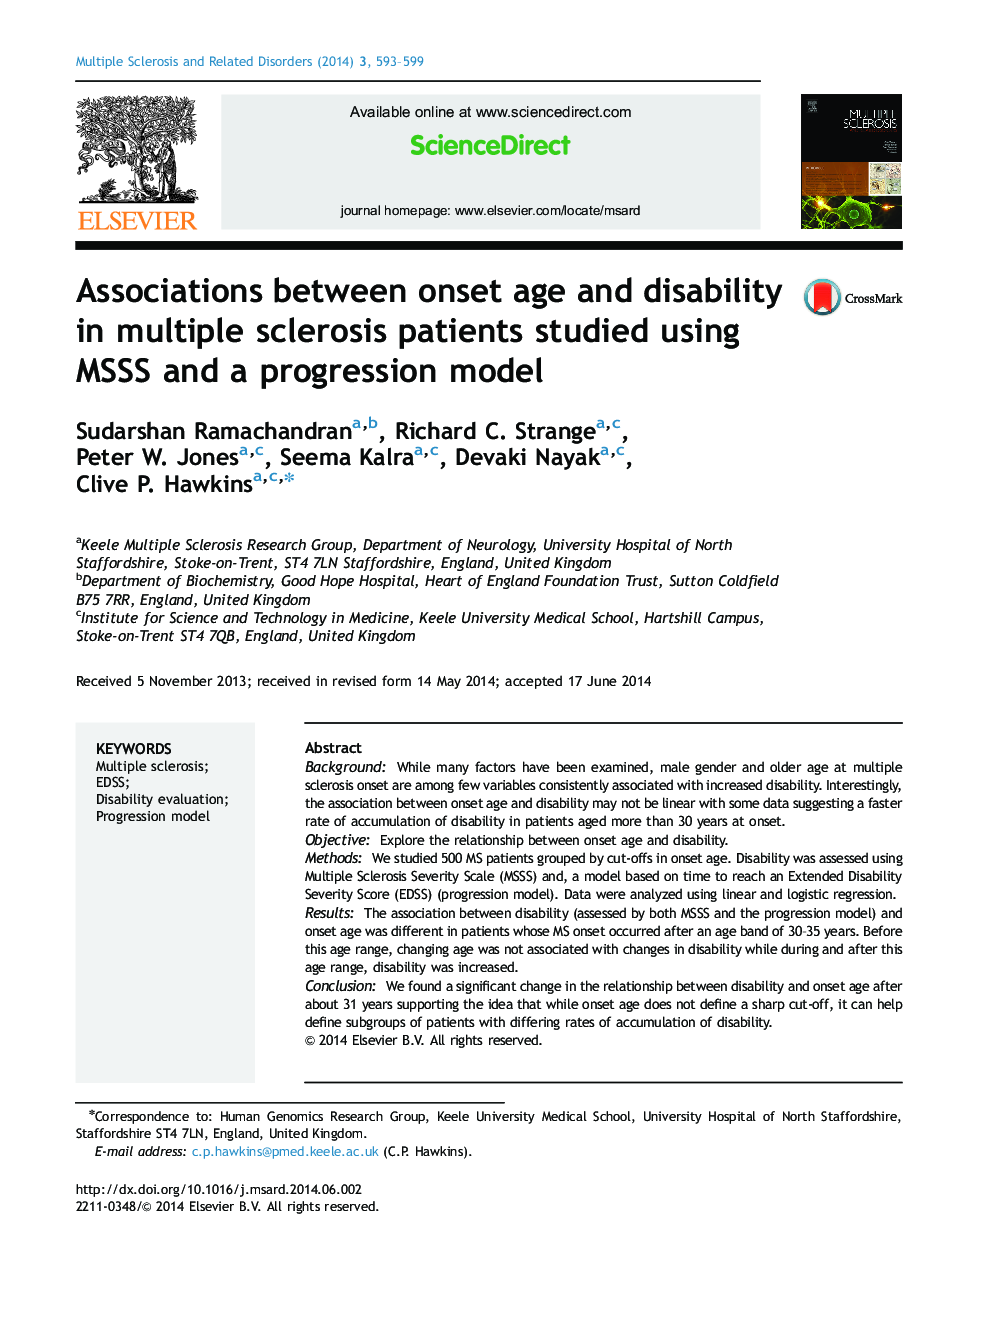 Associations between onset age and disability in multiple sclerosis patients studied using MSSS and a progression model